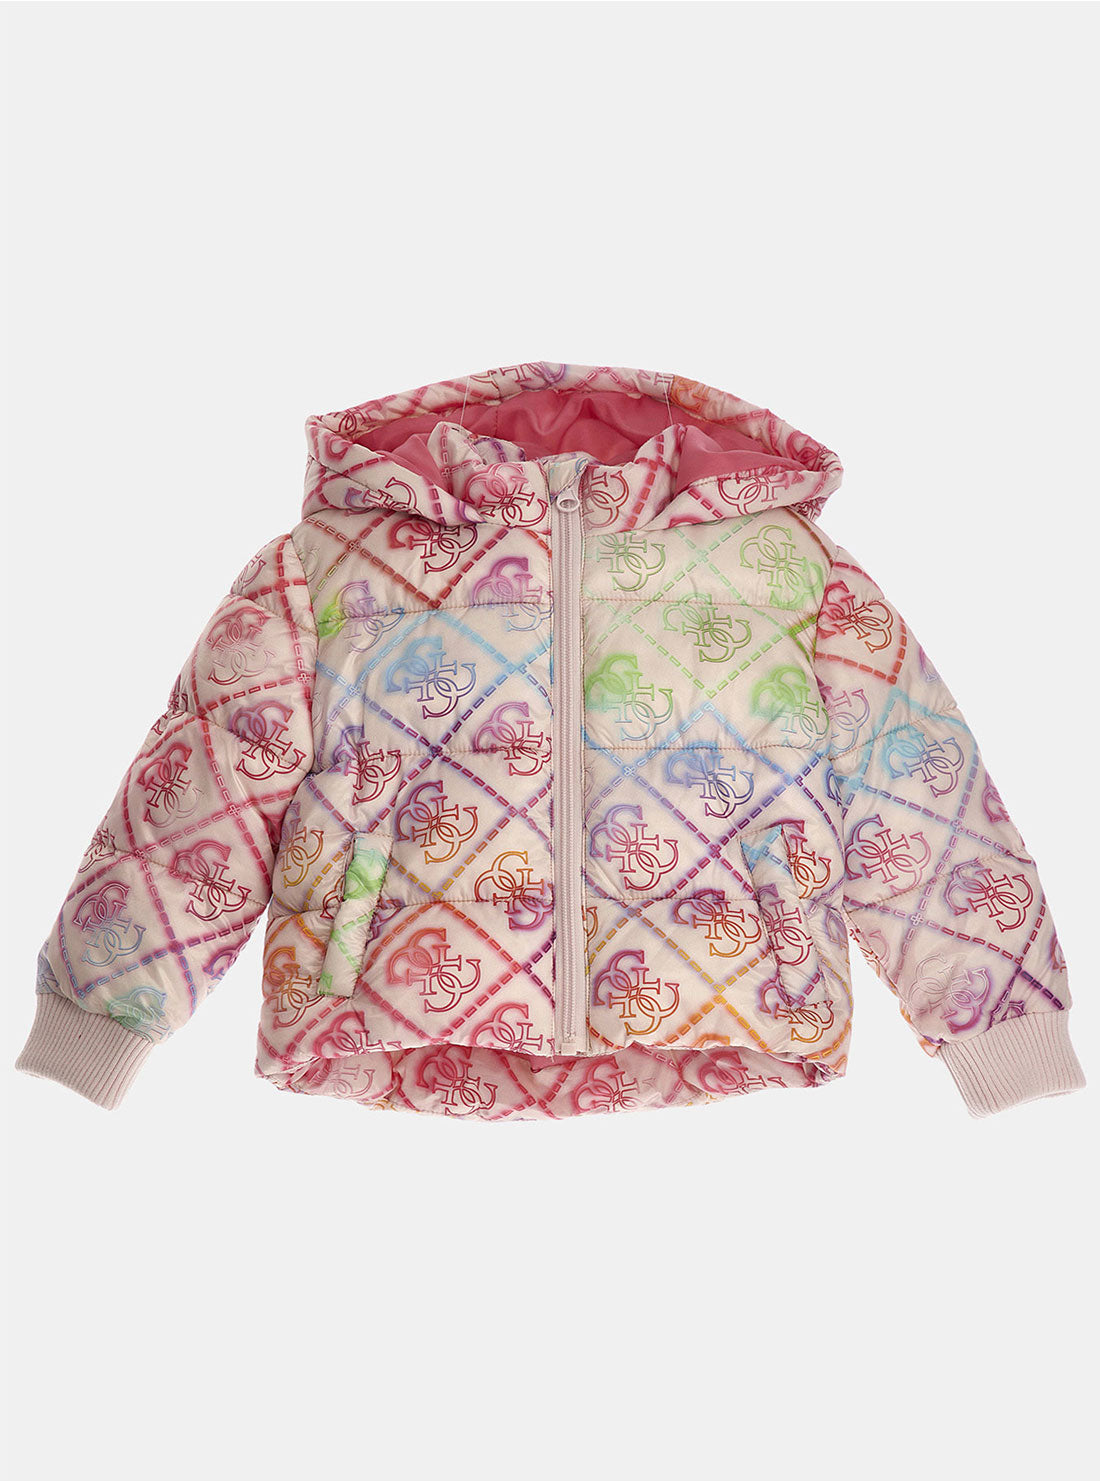 GUESS Pink Multi Hooded Padded Jacket (2-7) front view